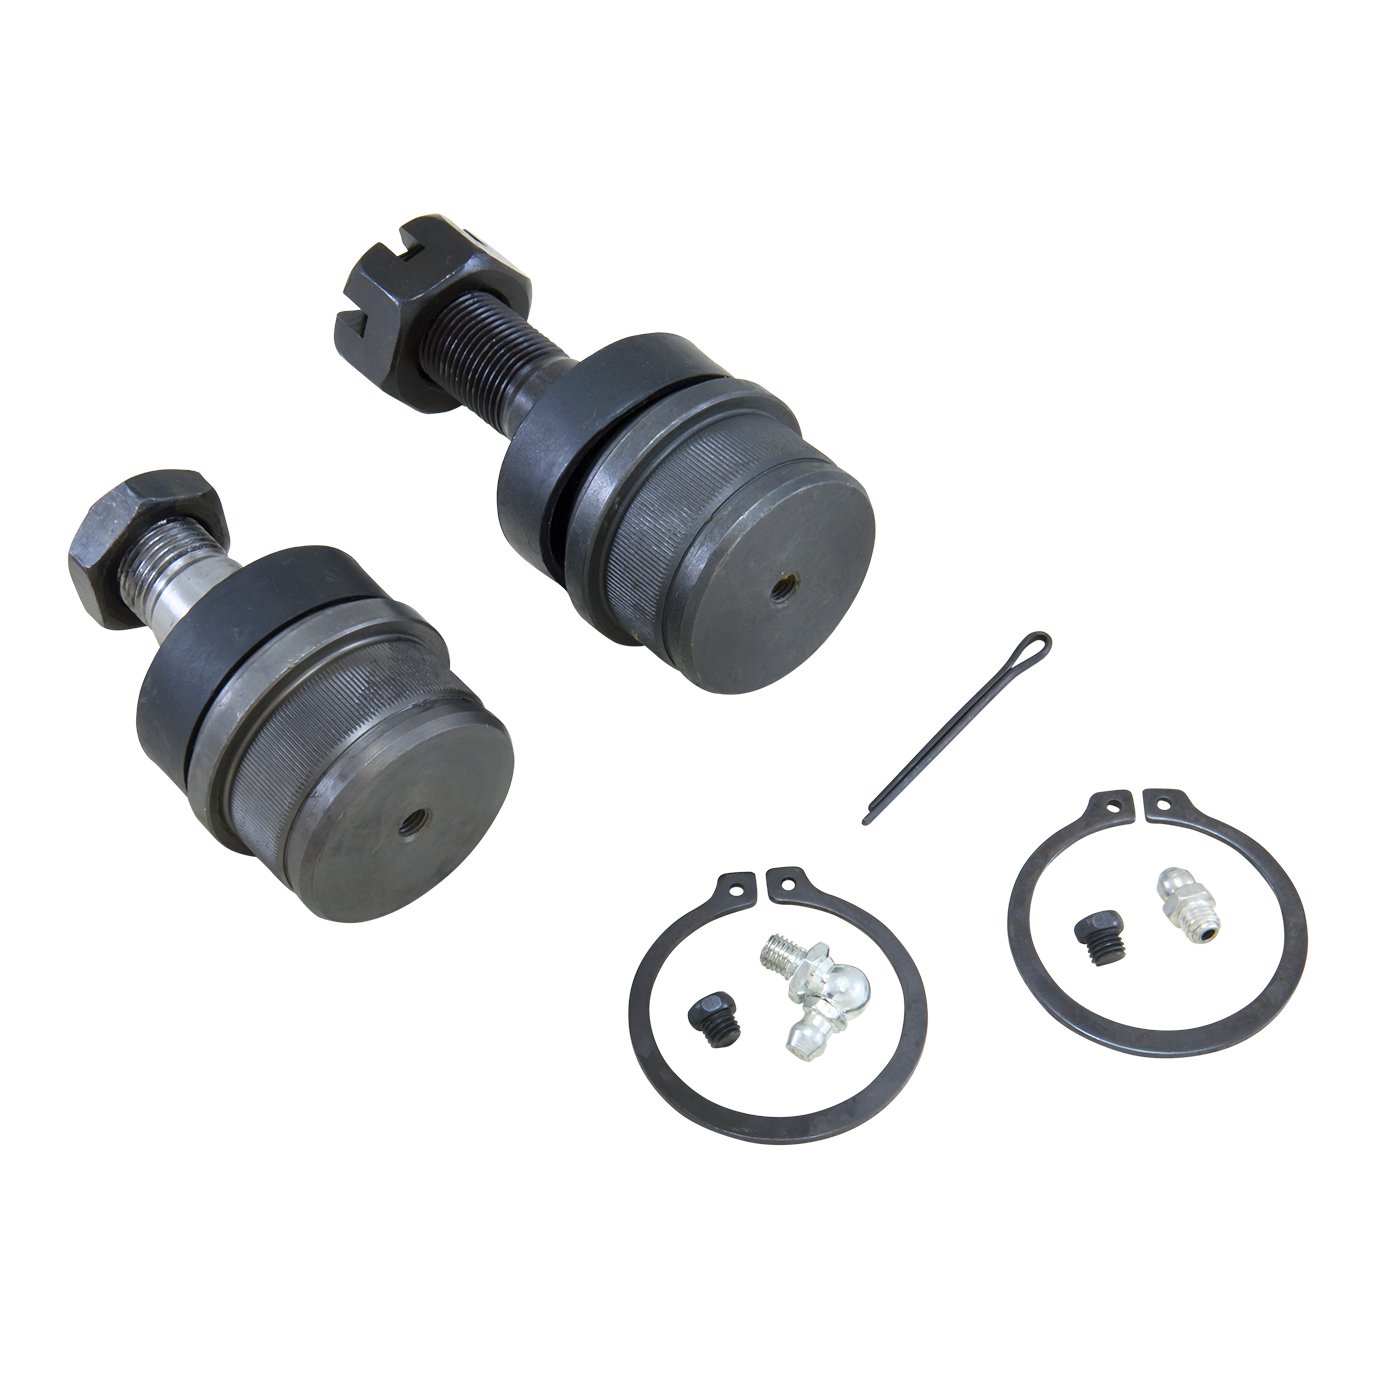 Ball Joint Kit For Dana 44 Ifs, 1980-'96 Bronco & F150, One Side